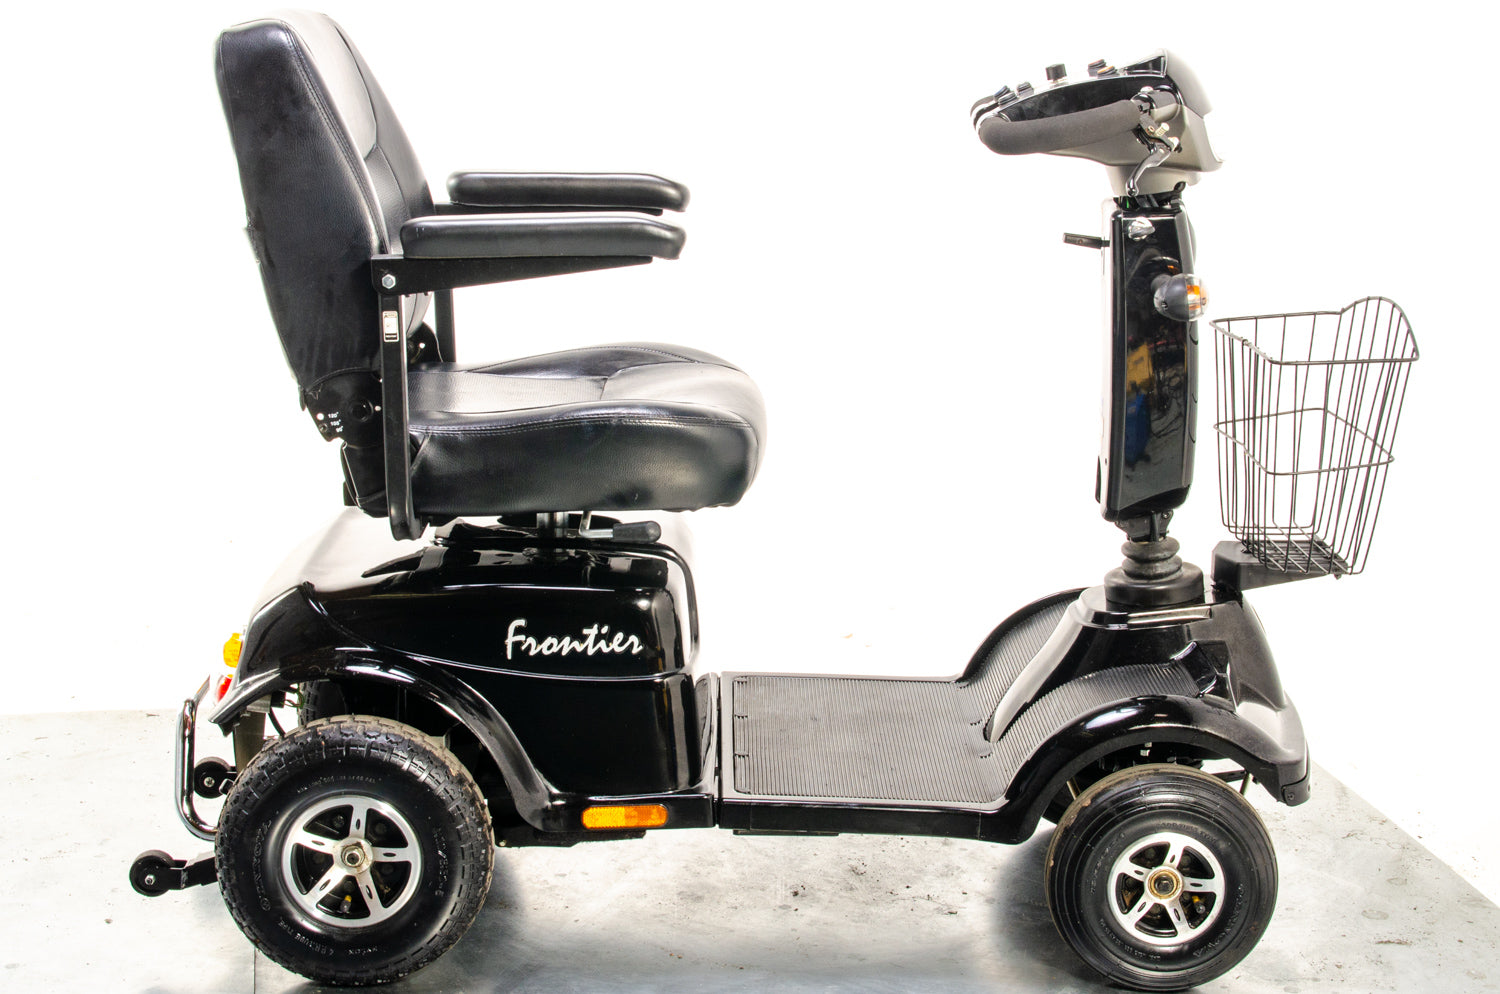 Rascal Frontier All-Terrain Off-Road Used Electric Mobility Scooter 8mph Suspension Midsize Black 13293